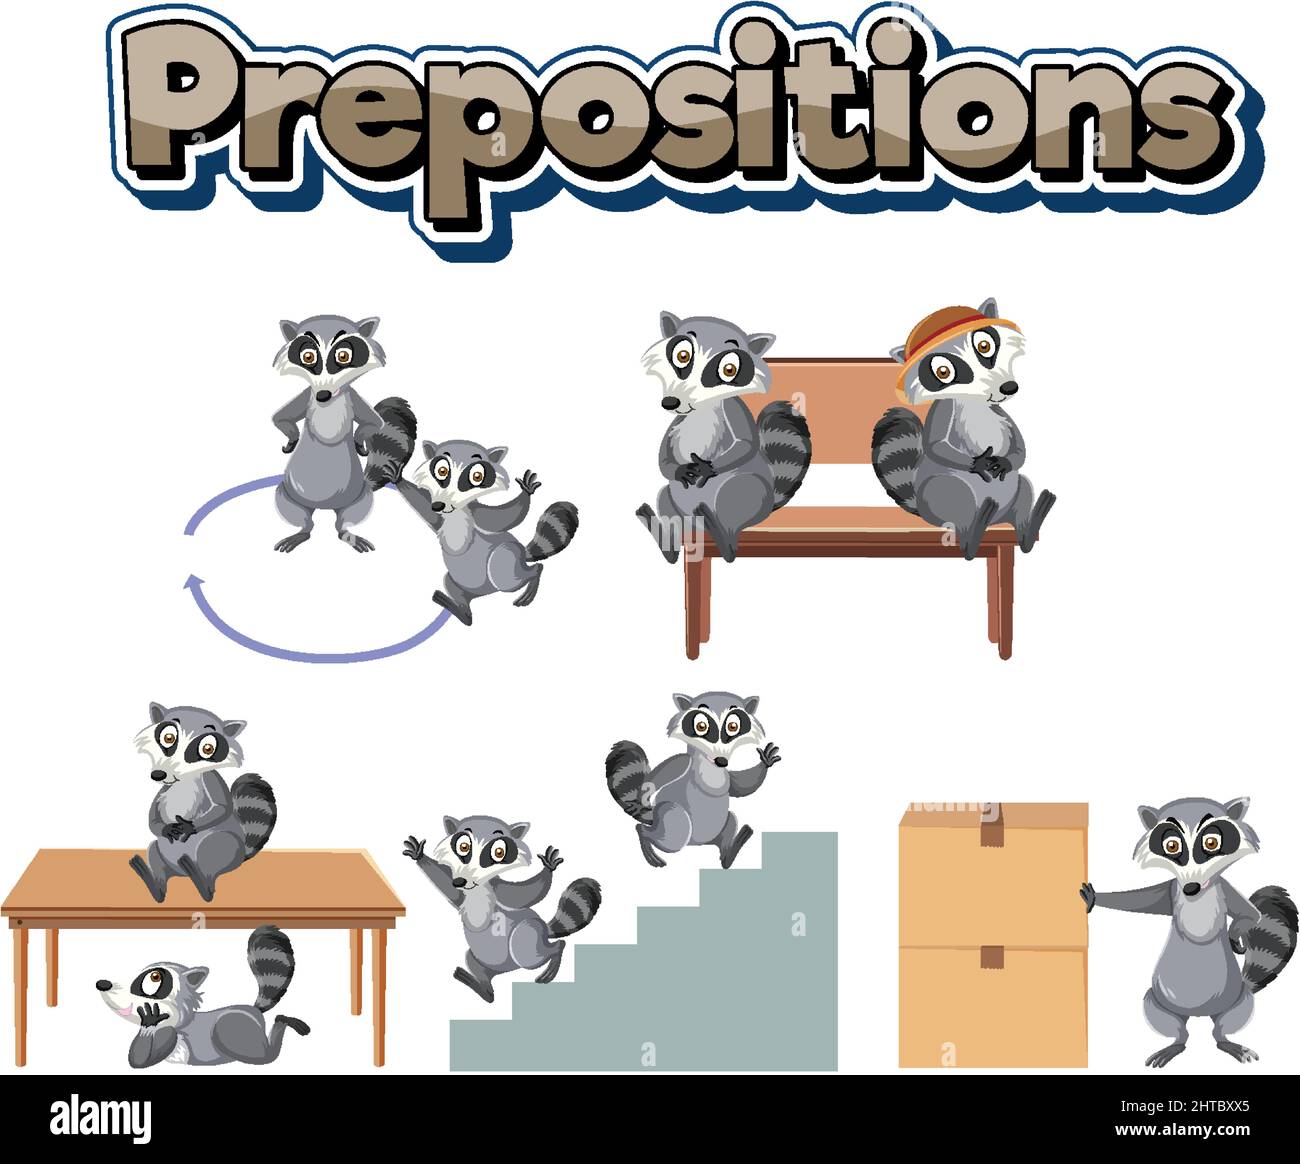 Prepostion wordcard design with movements of raccoon illustration Stock Vector